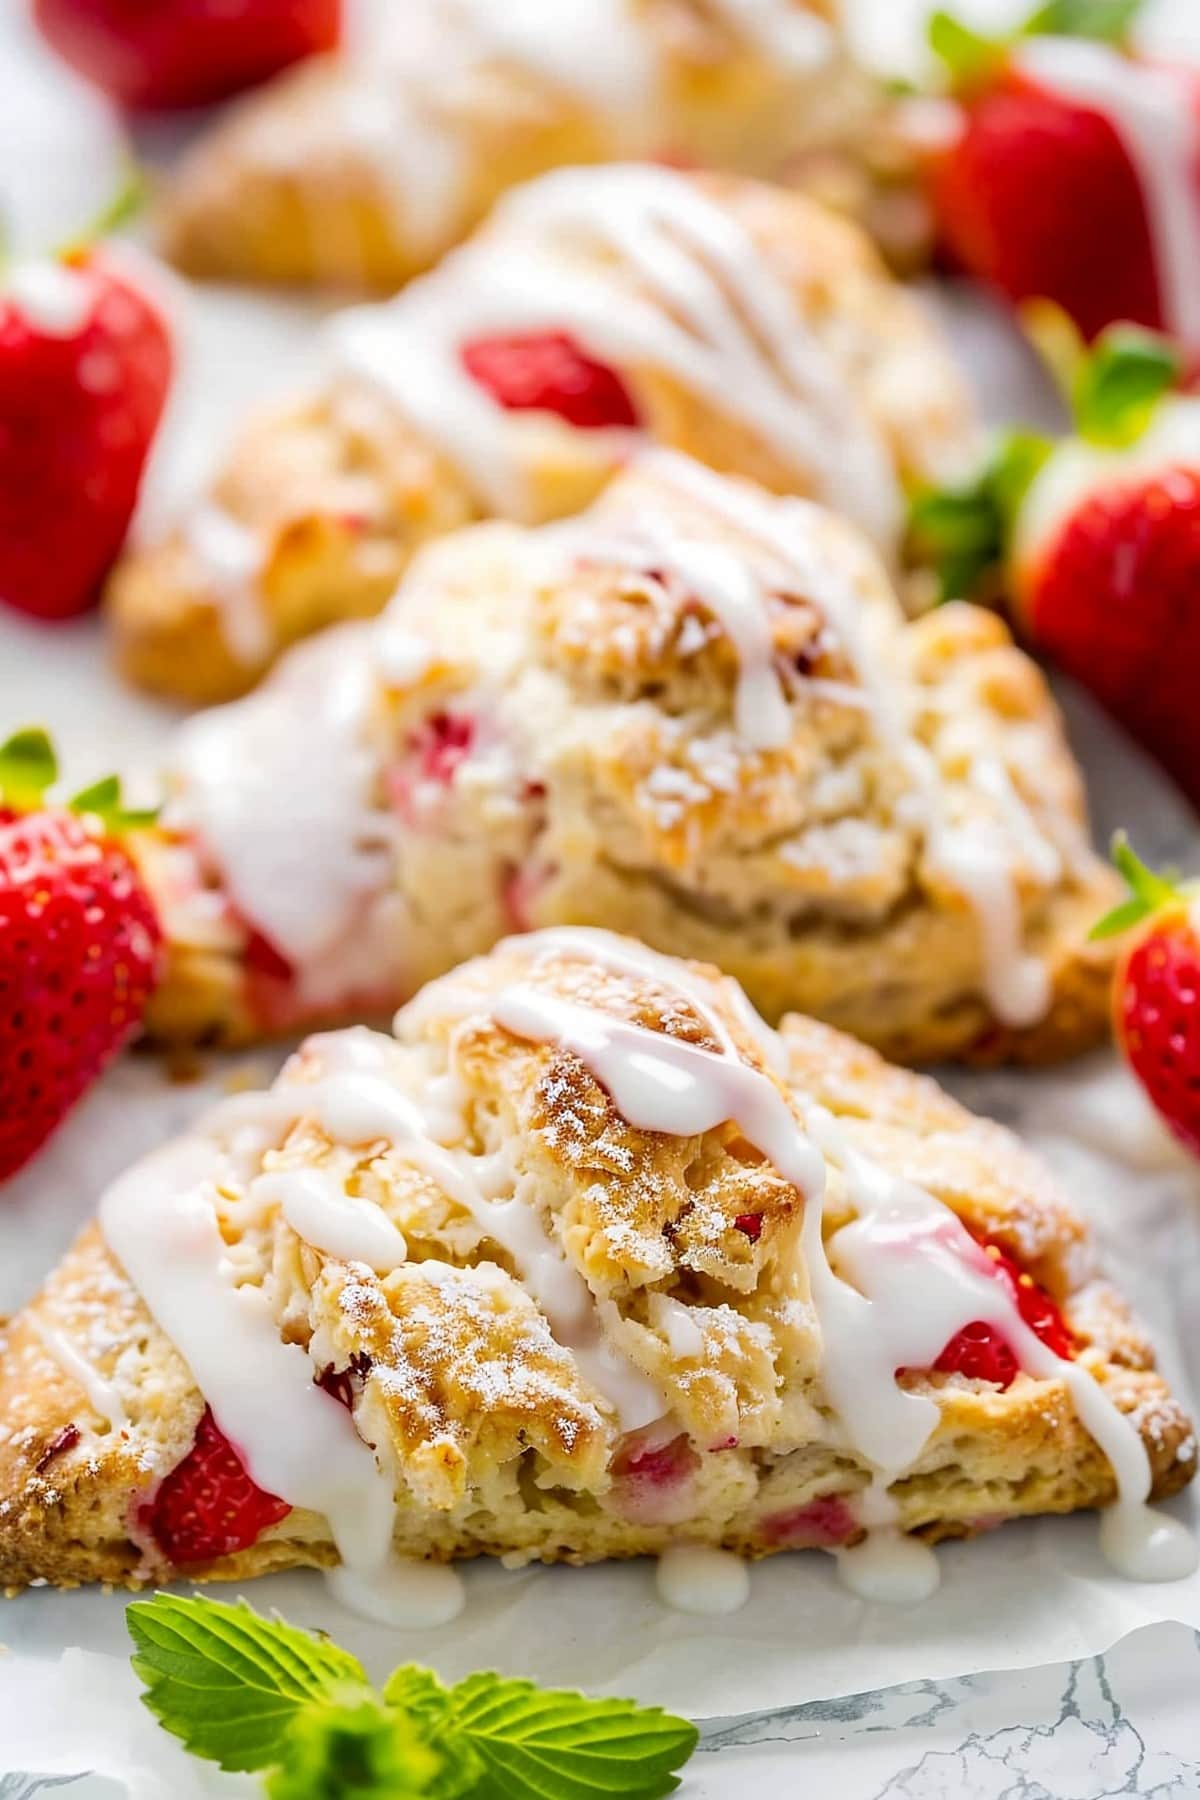 Mouthwatering strawberry scones, infused fresh, ripe strawberries and drizzled with glaze